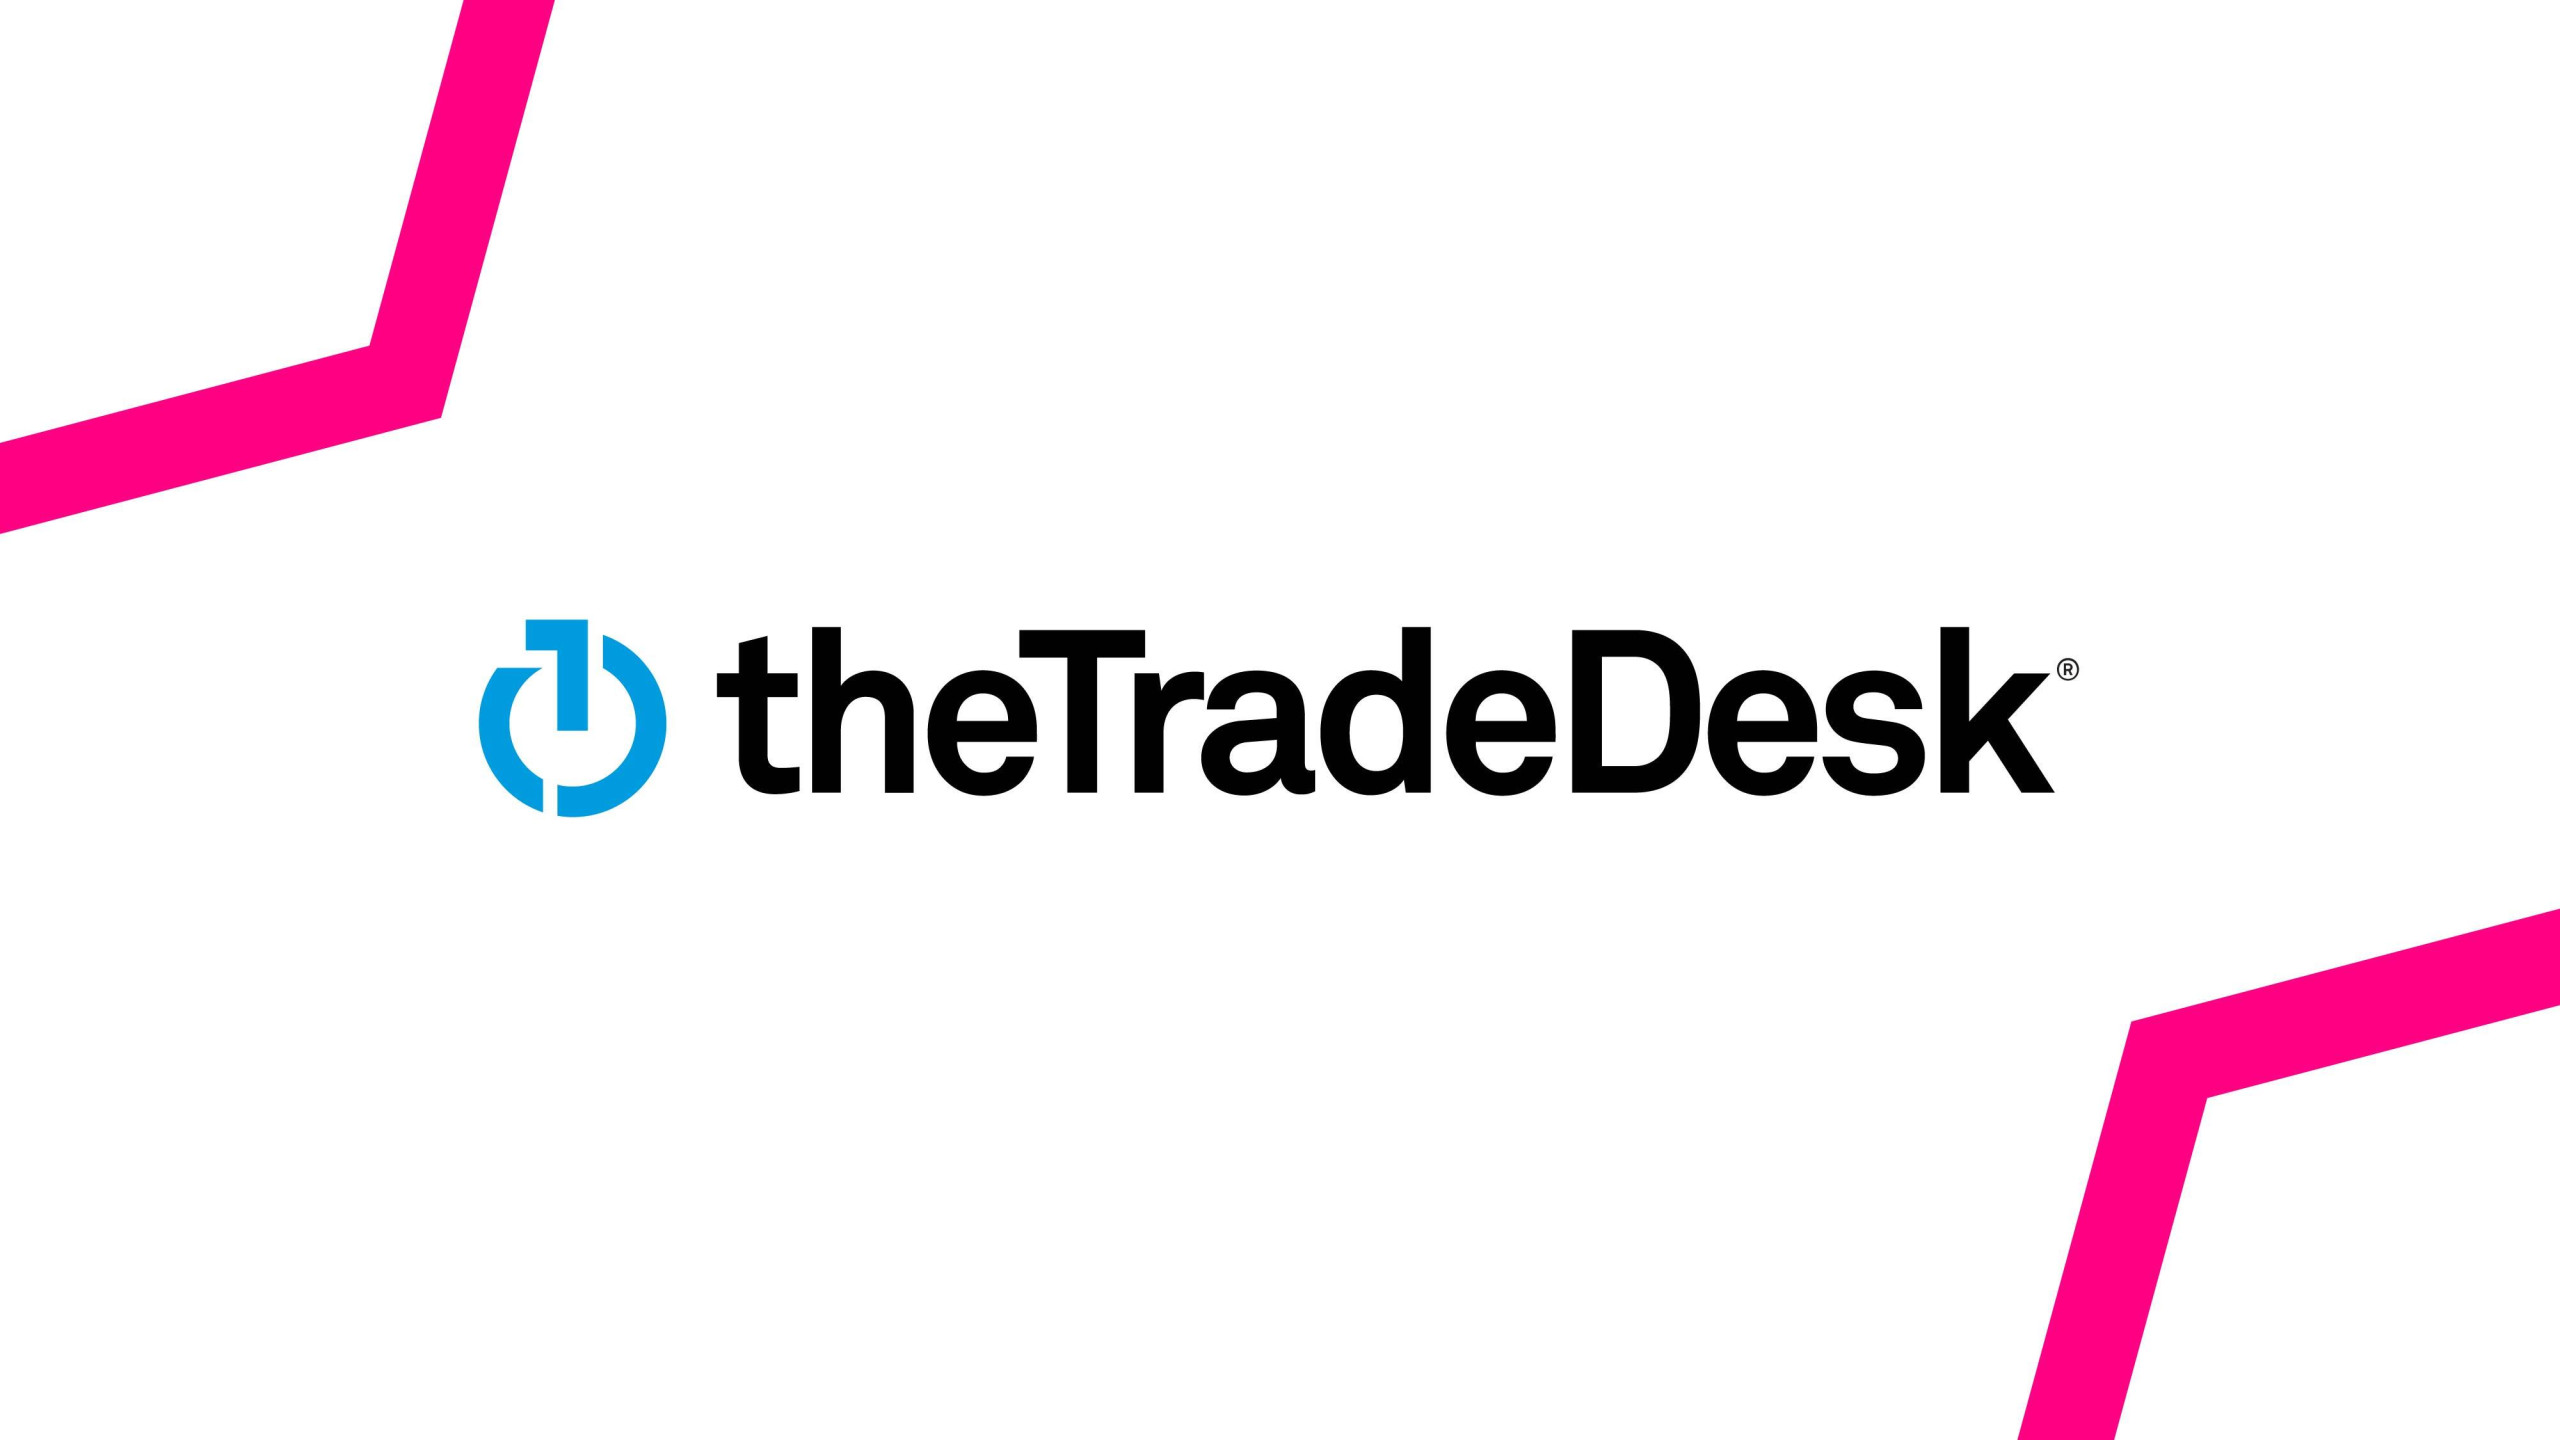 Tradedesk Partnership with Hivestack